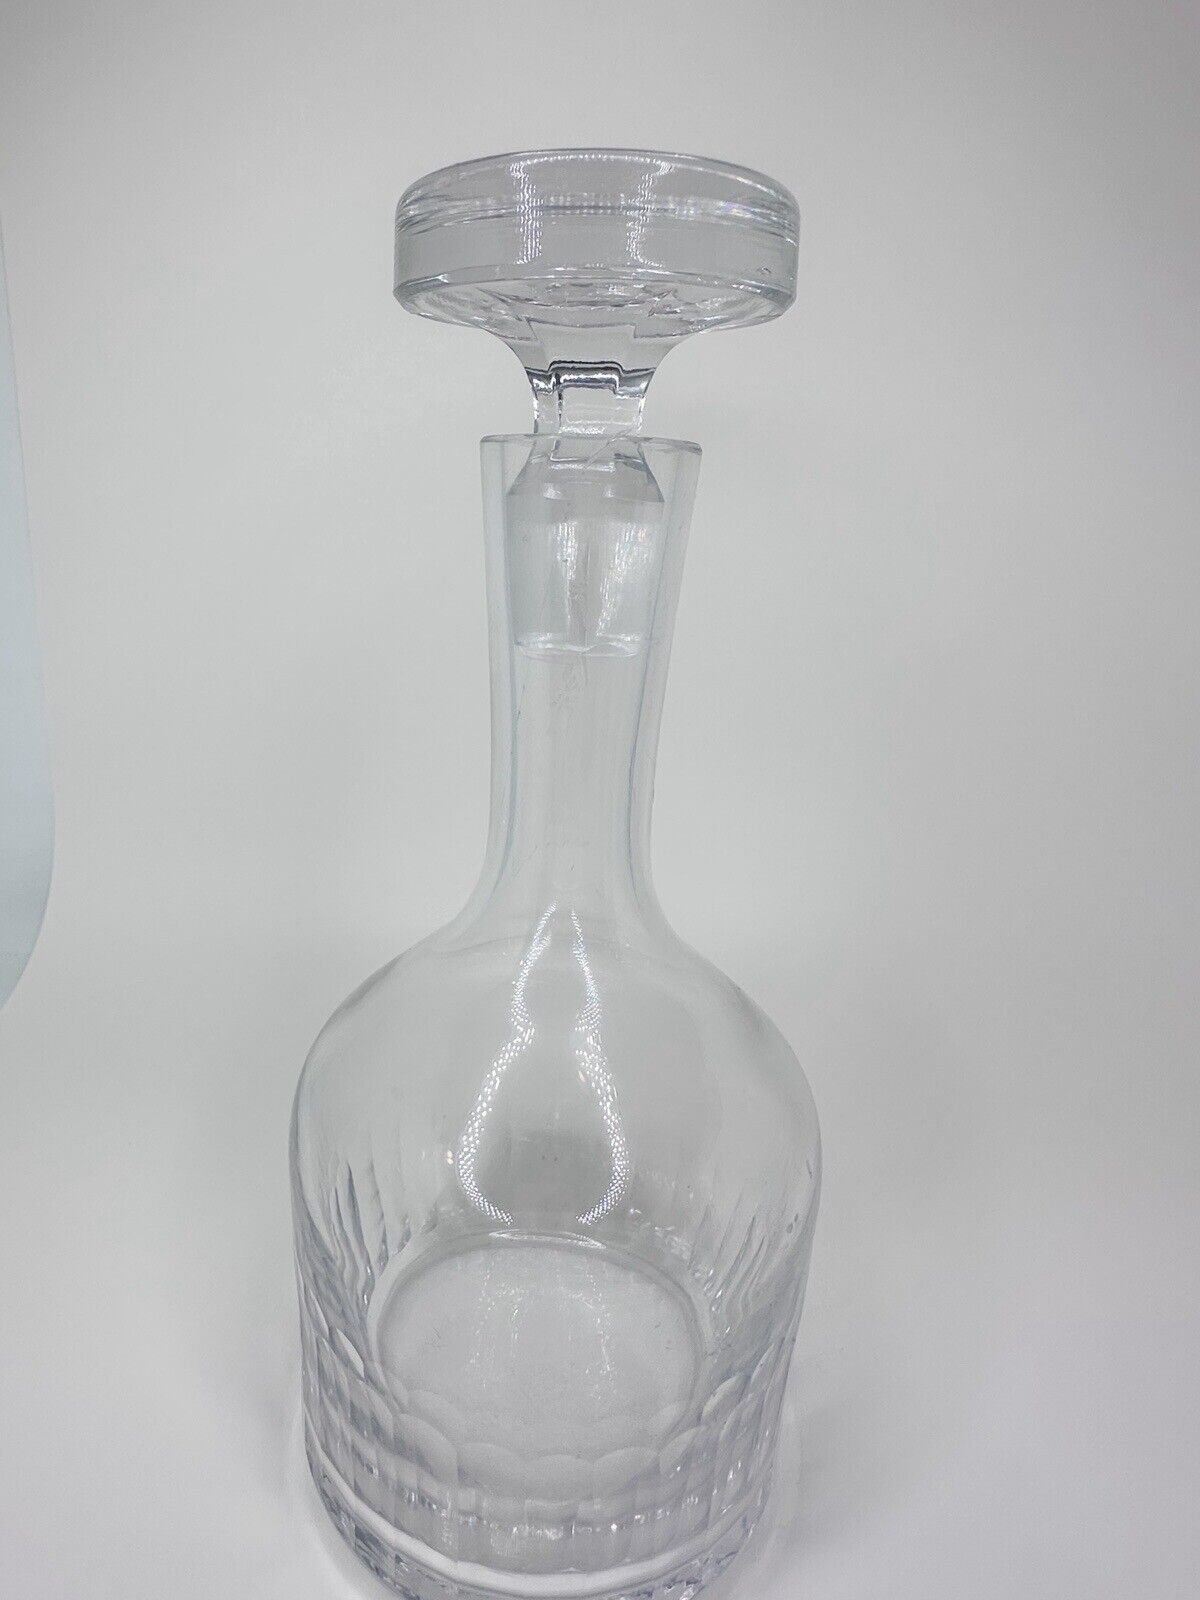 Bayel France Crystal Decanter Cut Panels With Stopper 12